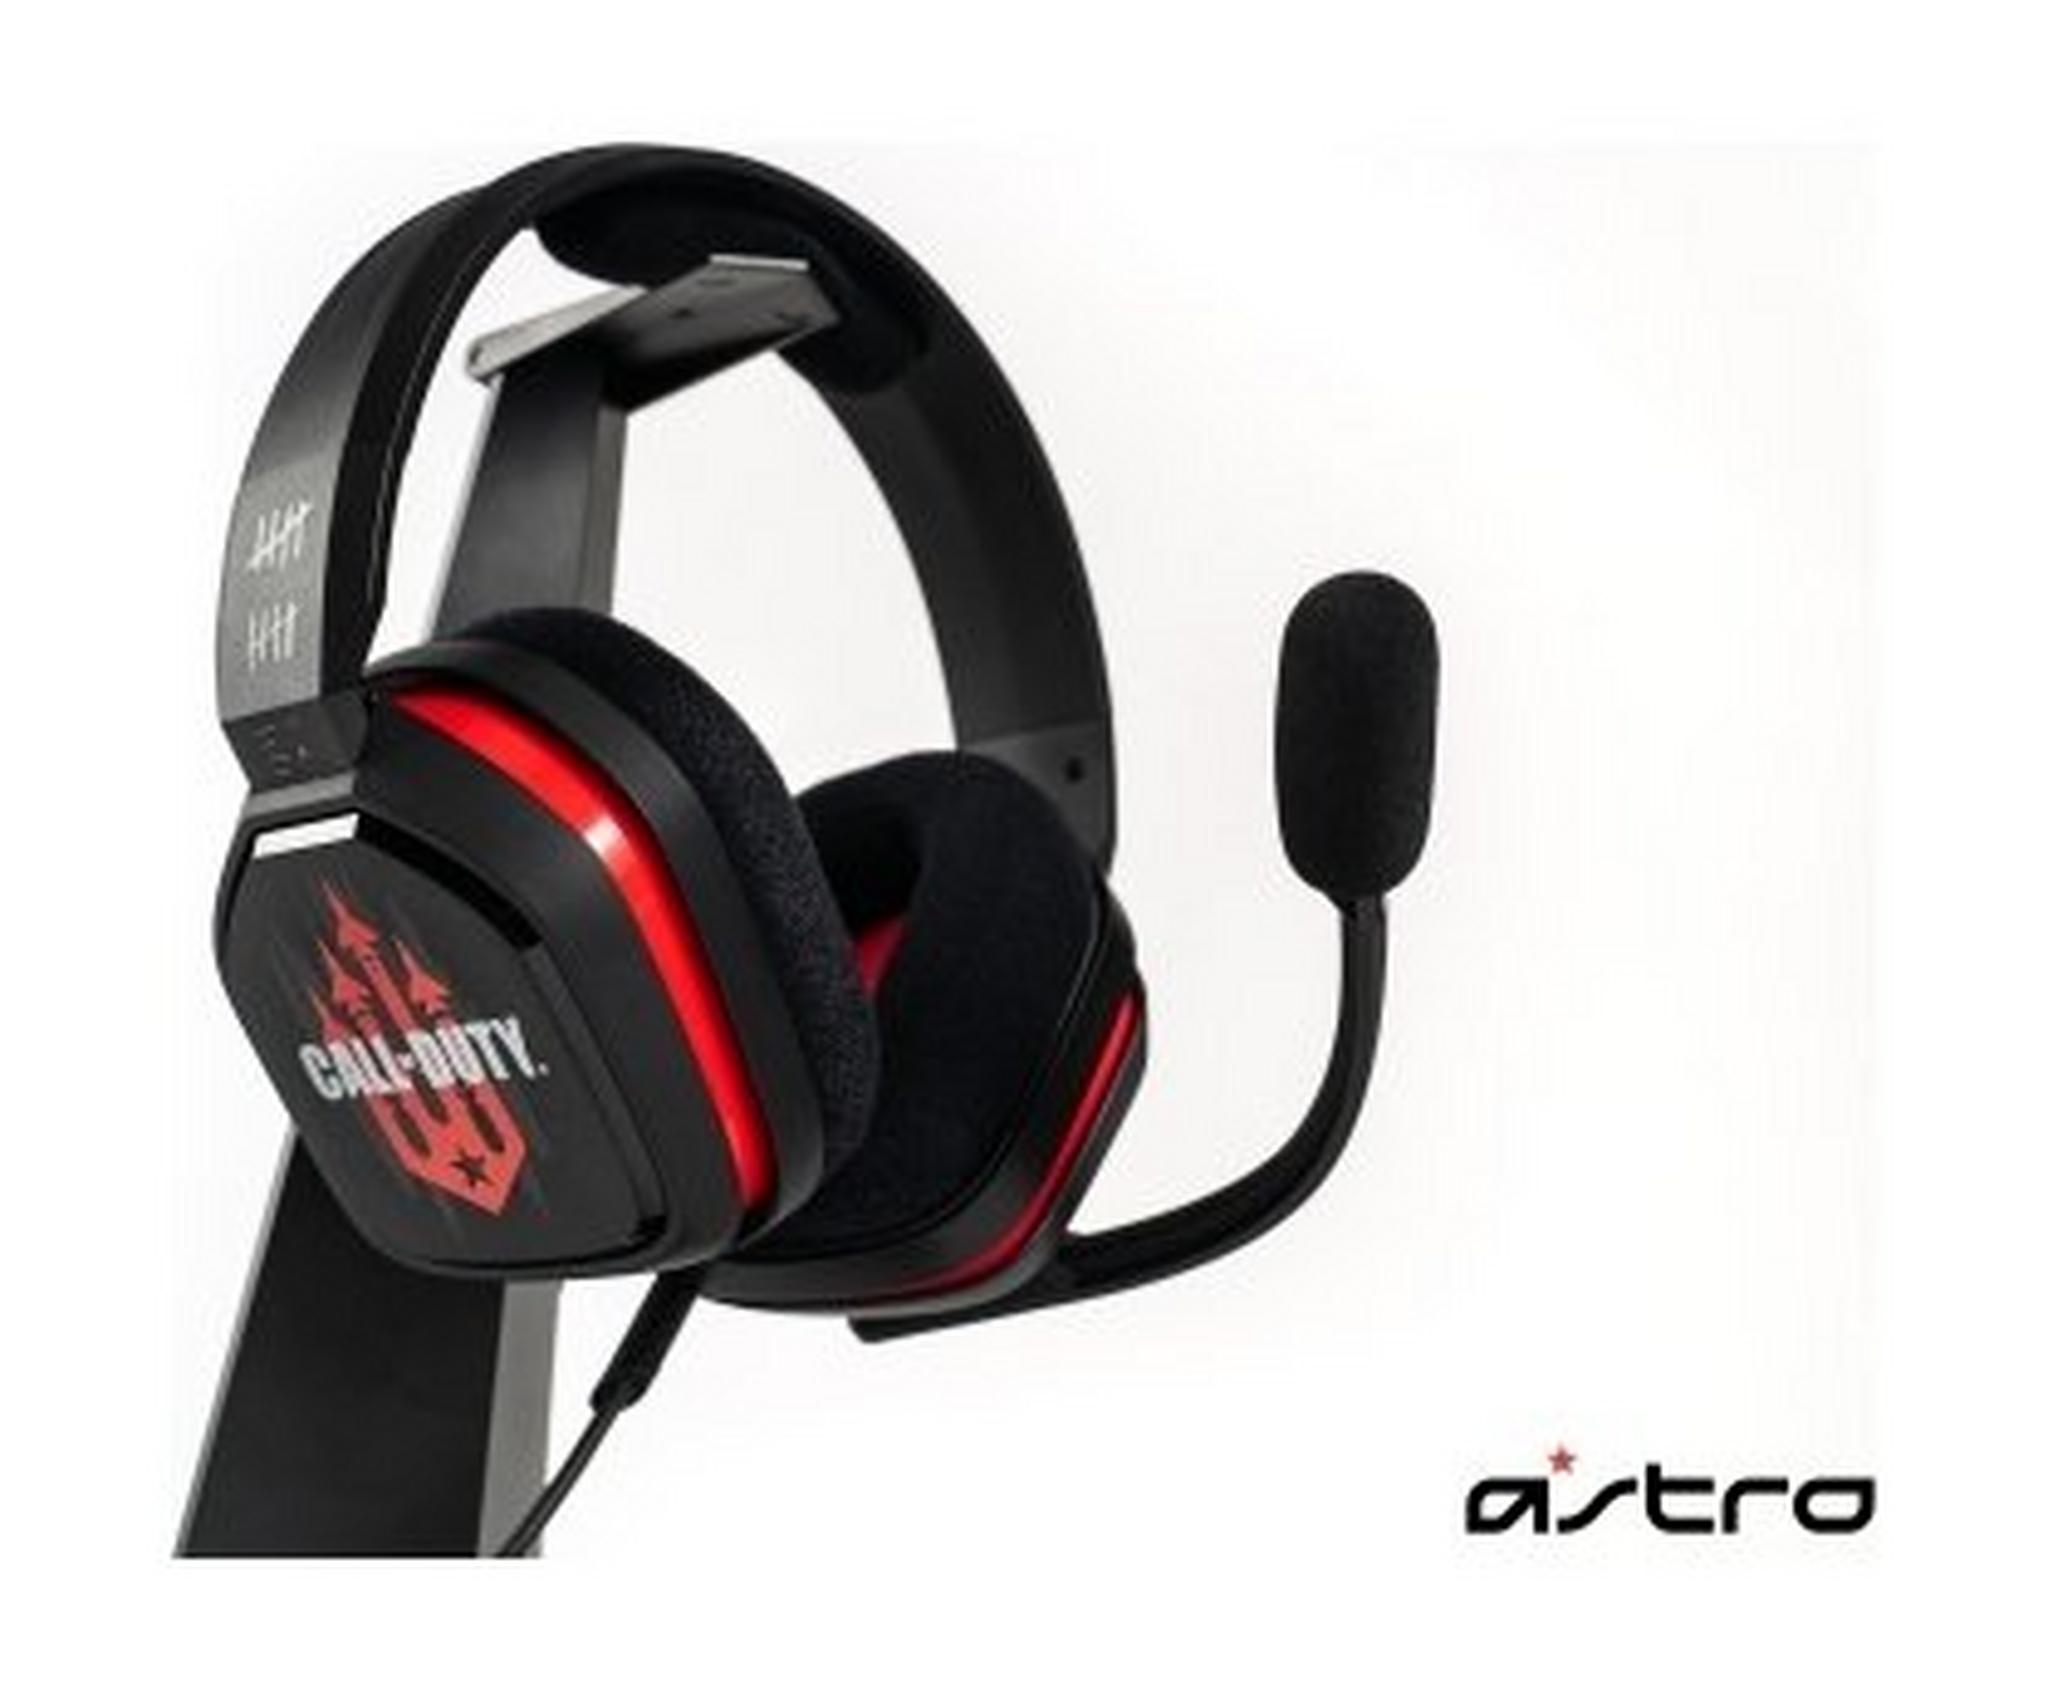 Astro A10 Call Of Duty Cold Ward Headset - Black / Red